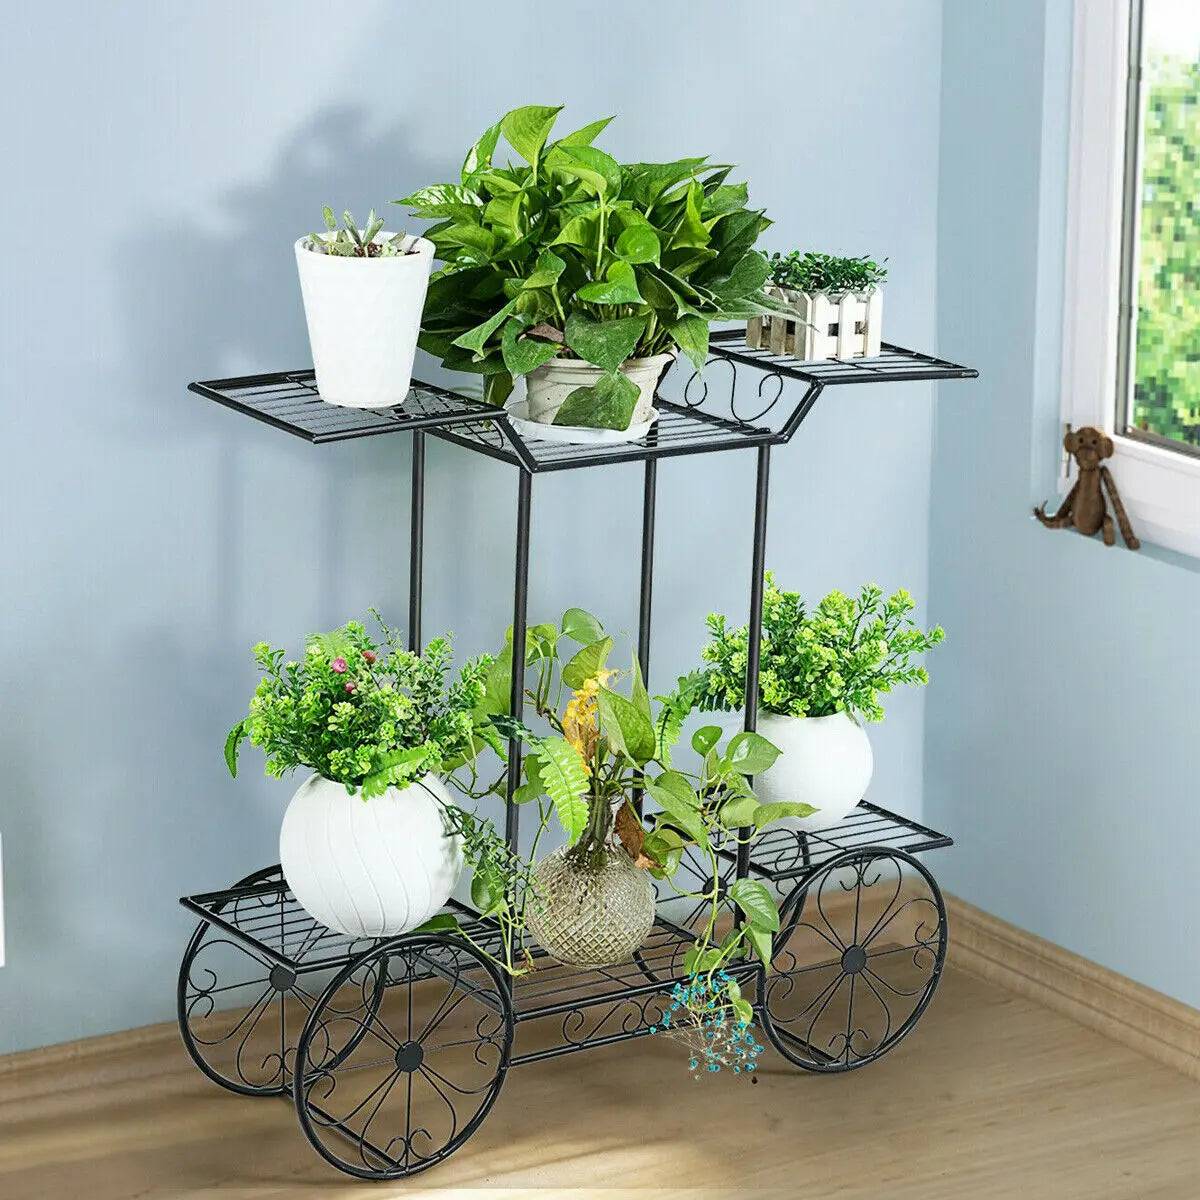 European-style Plant Stand Giselle - Metal Plant Stands - KonnaLiving